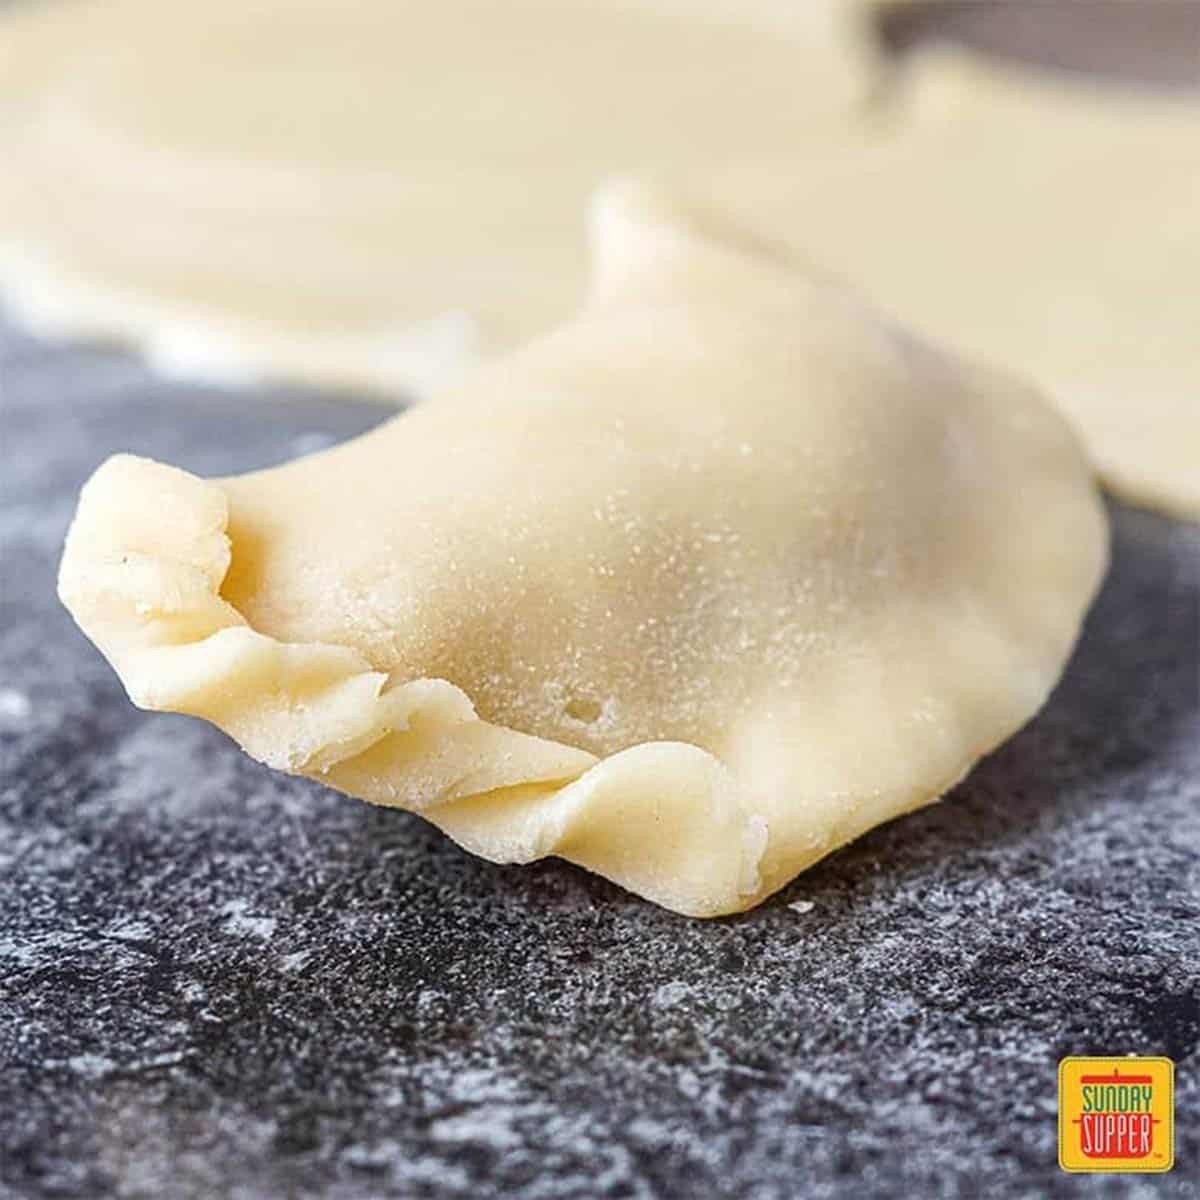 An unbaked chicken empanada with the edge crimped slightly to show how to fold empanadas